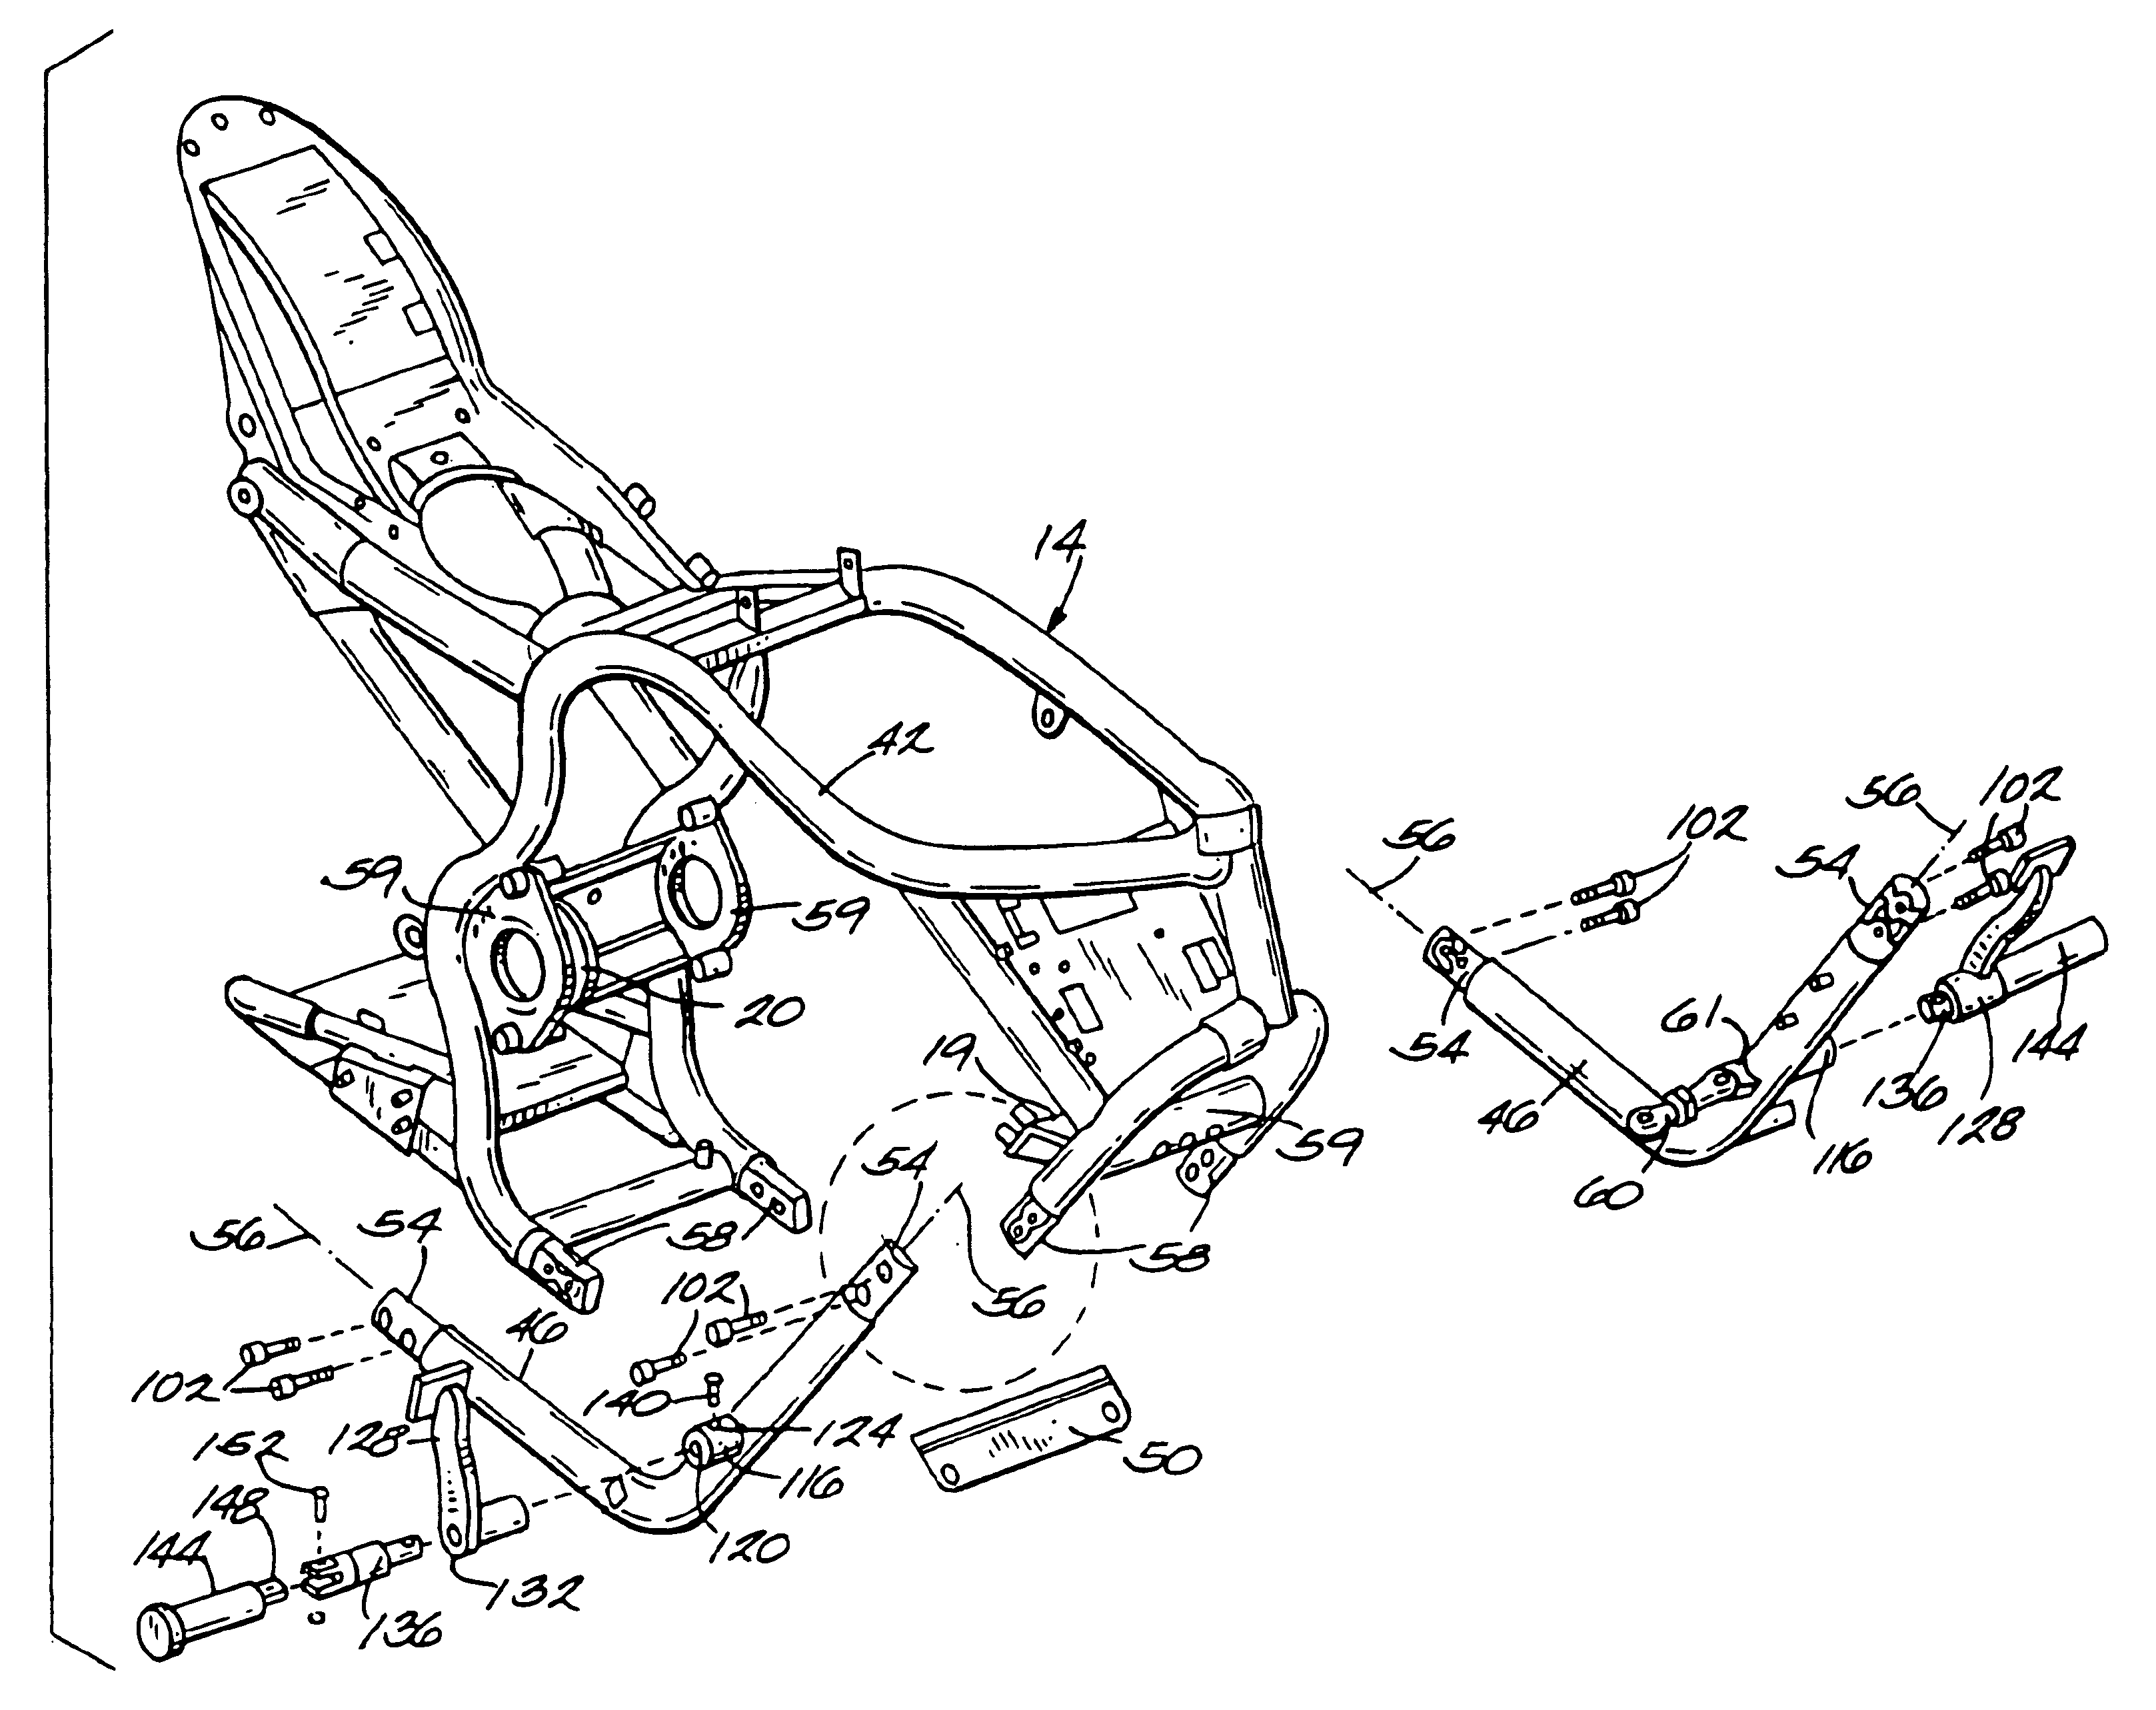 Motorcycle frame having removable portion